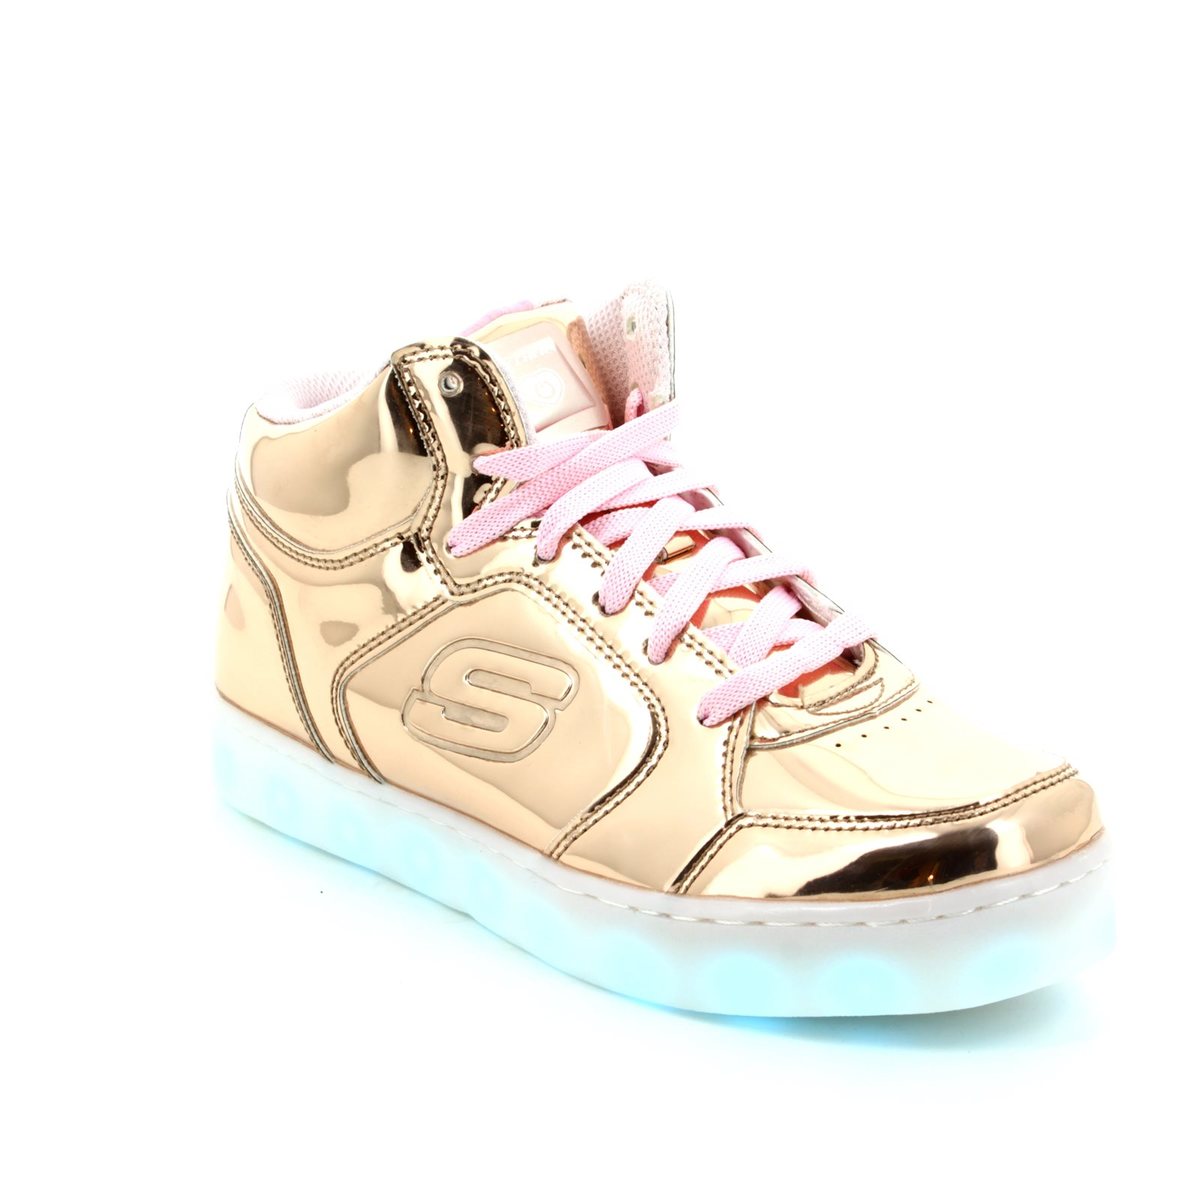 skechers gold light up shoes